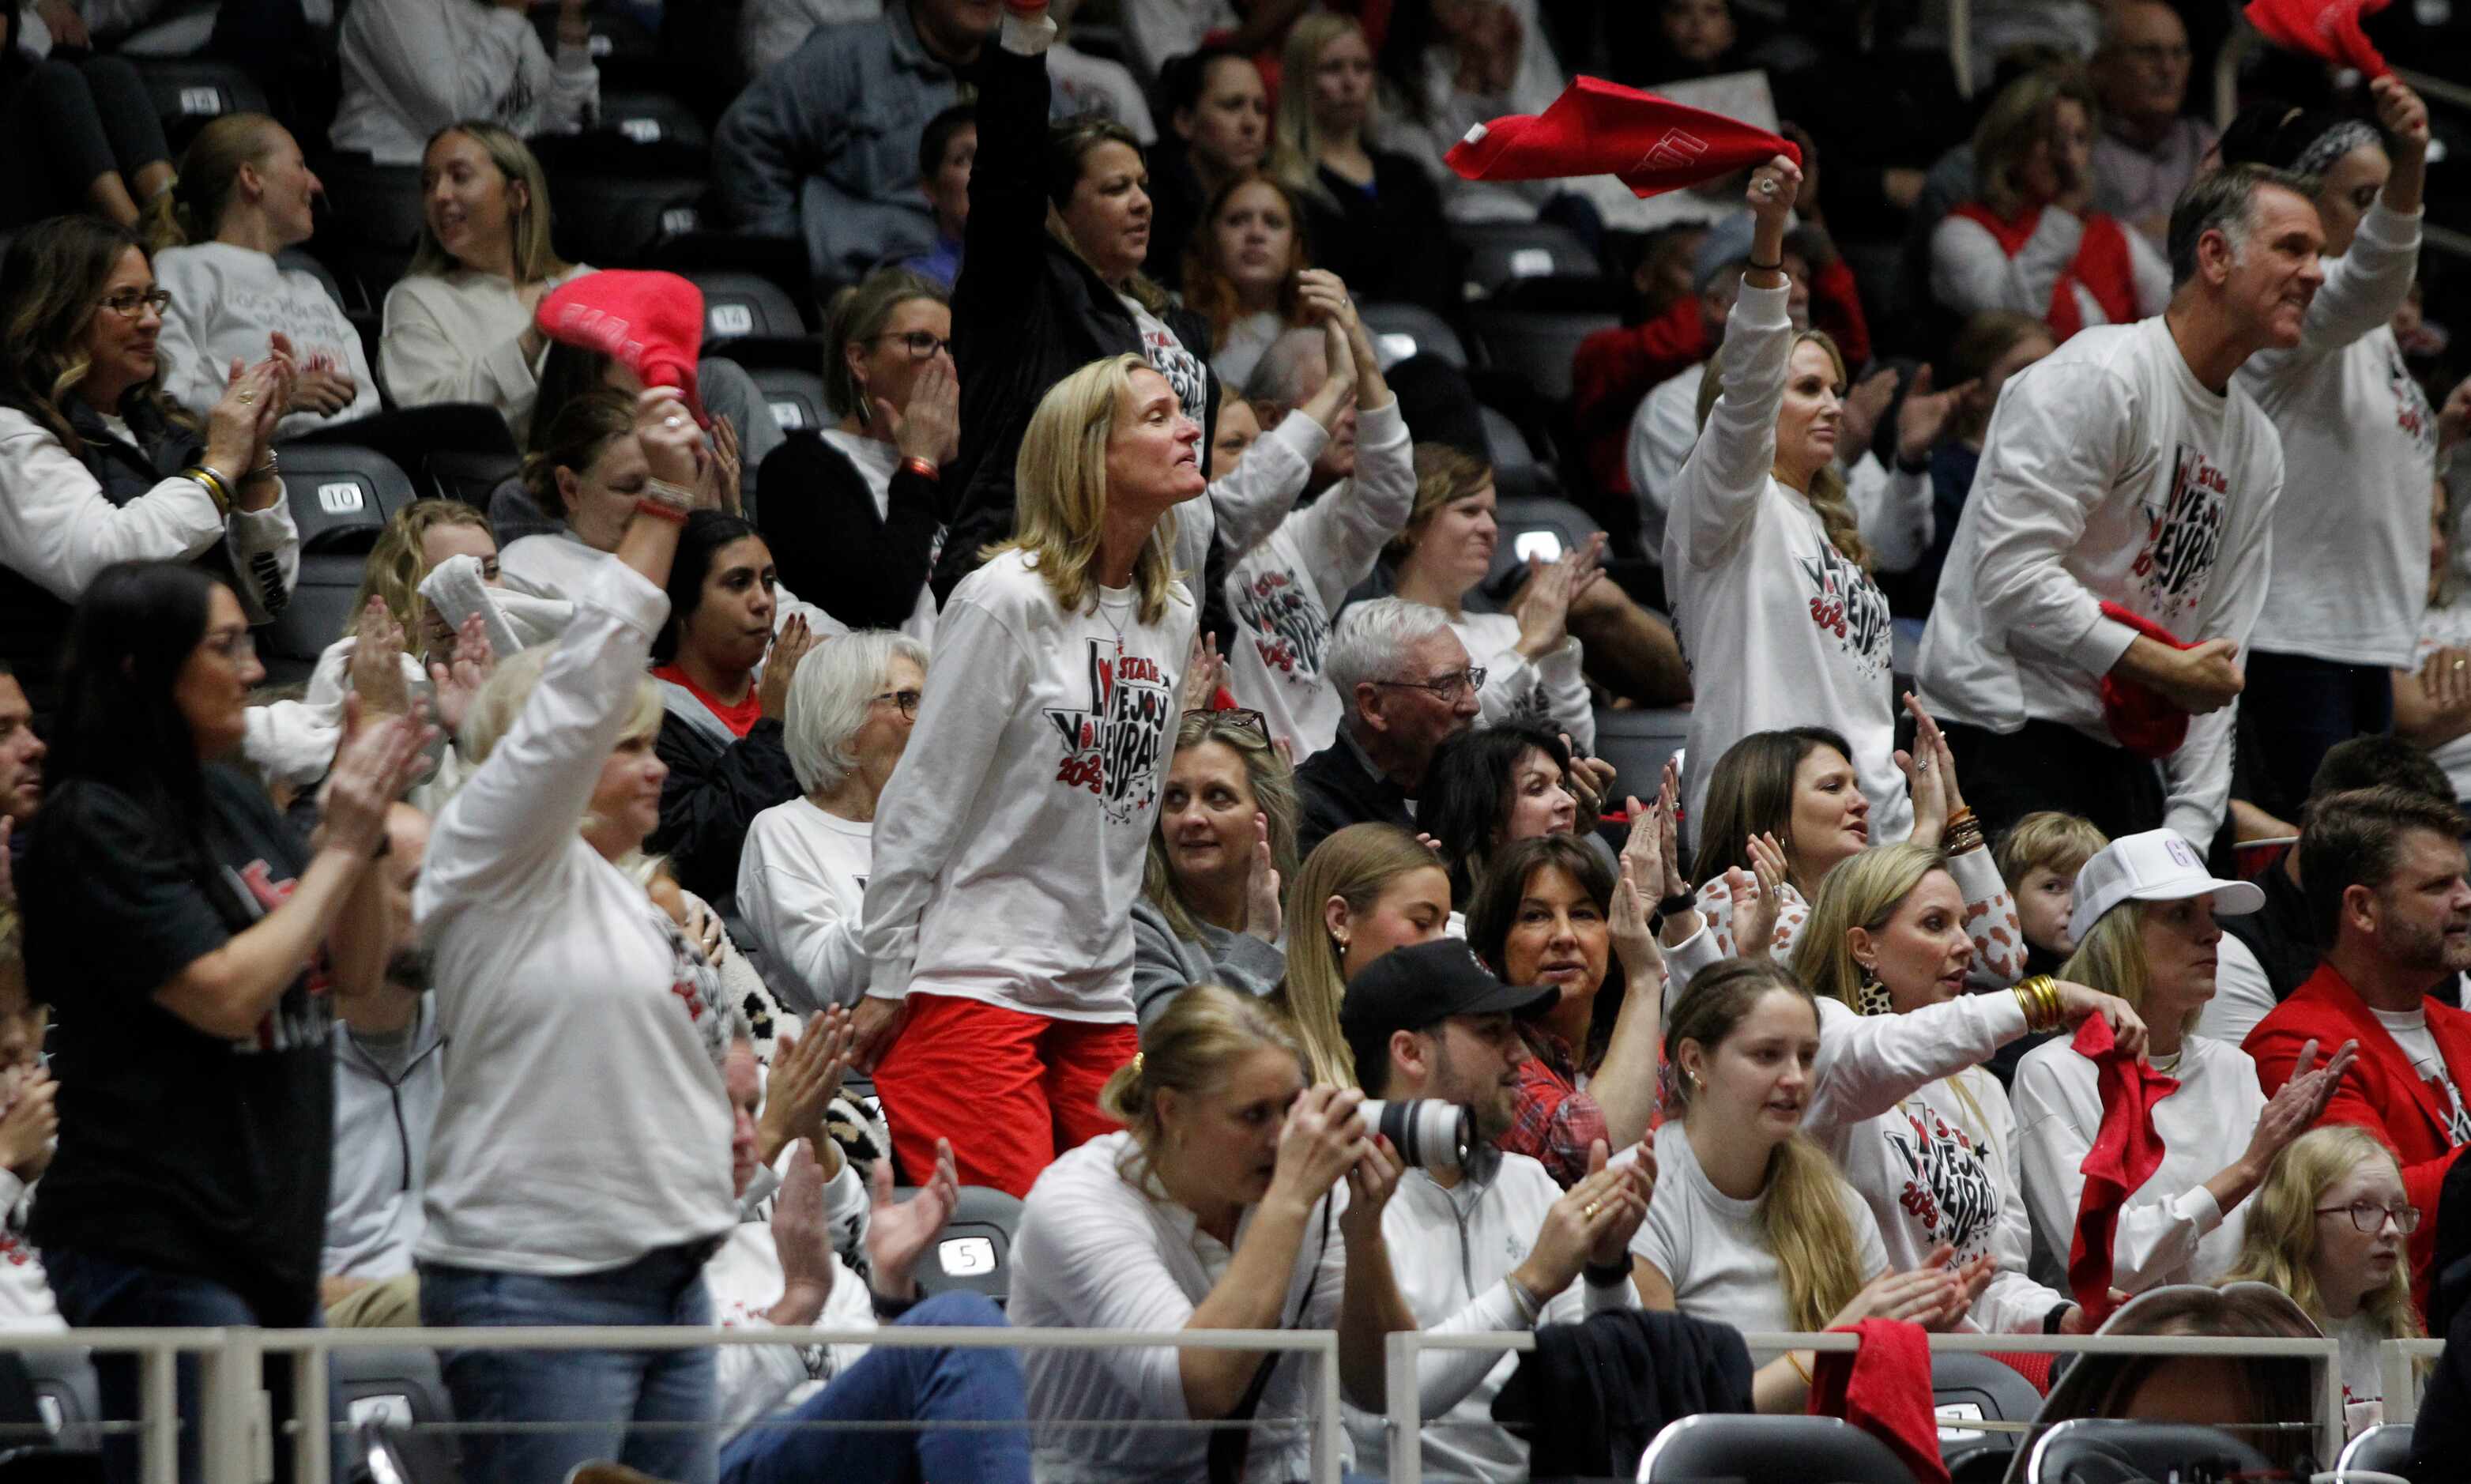 Lucas Lovejoy fans celebrate a point scored during the 2nd set of their match against Lamar...